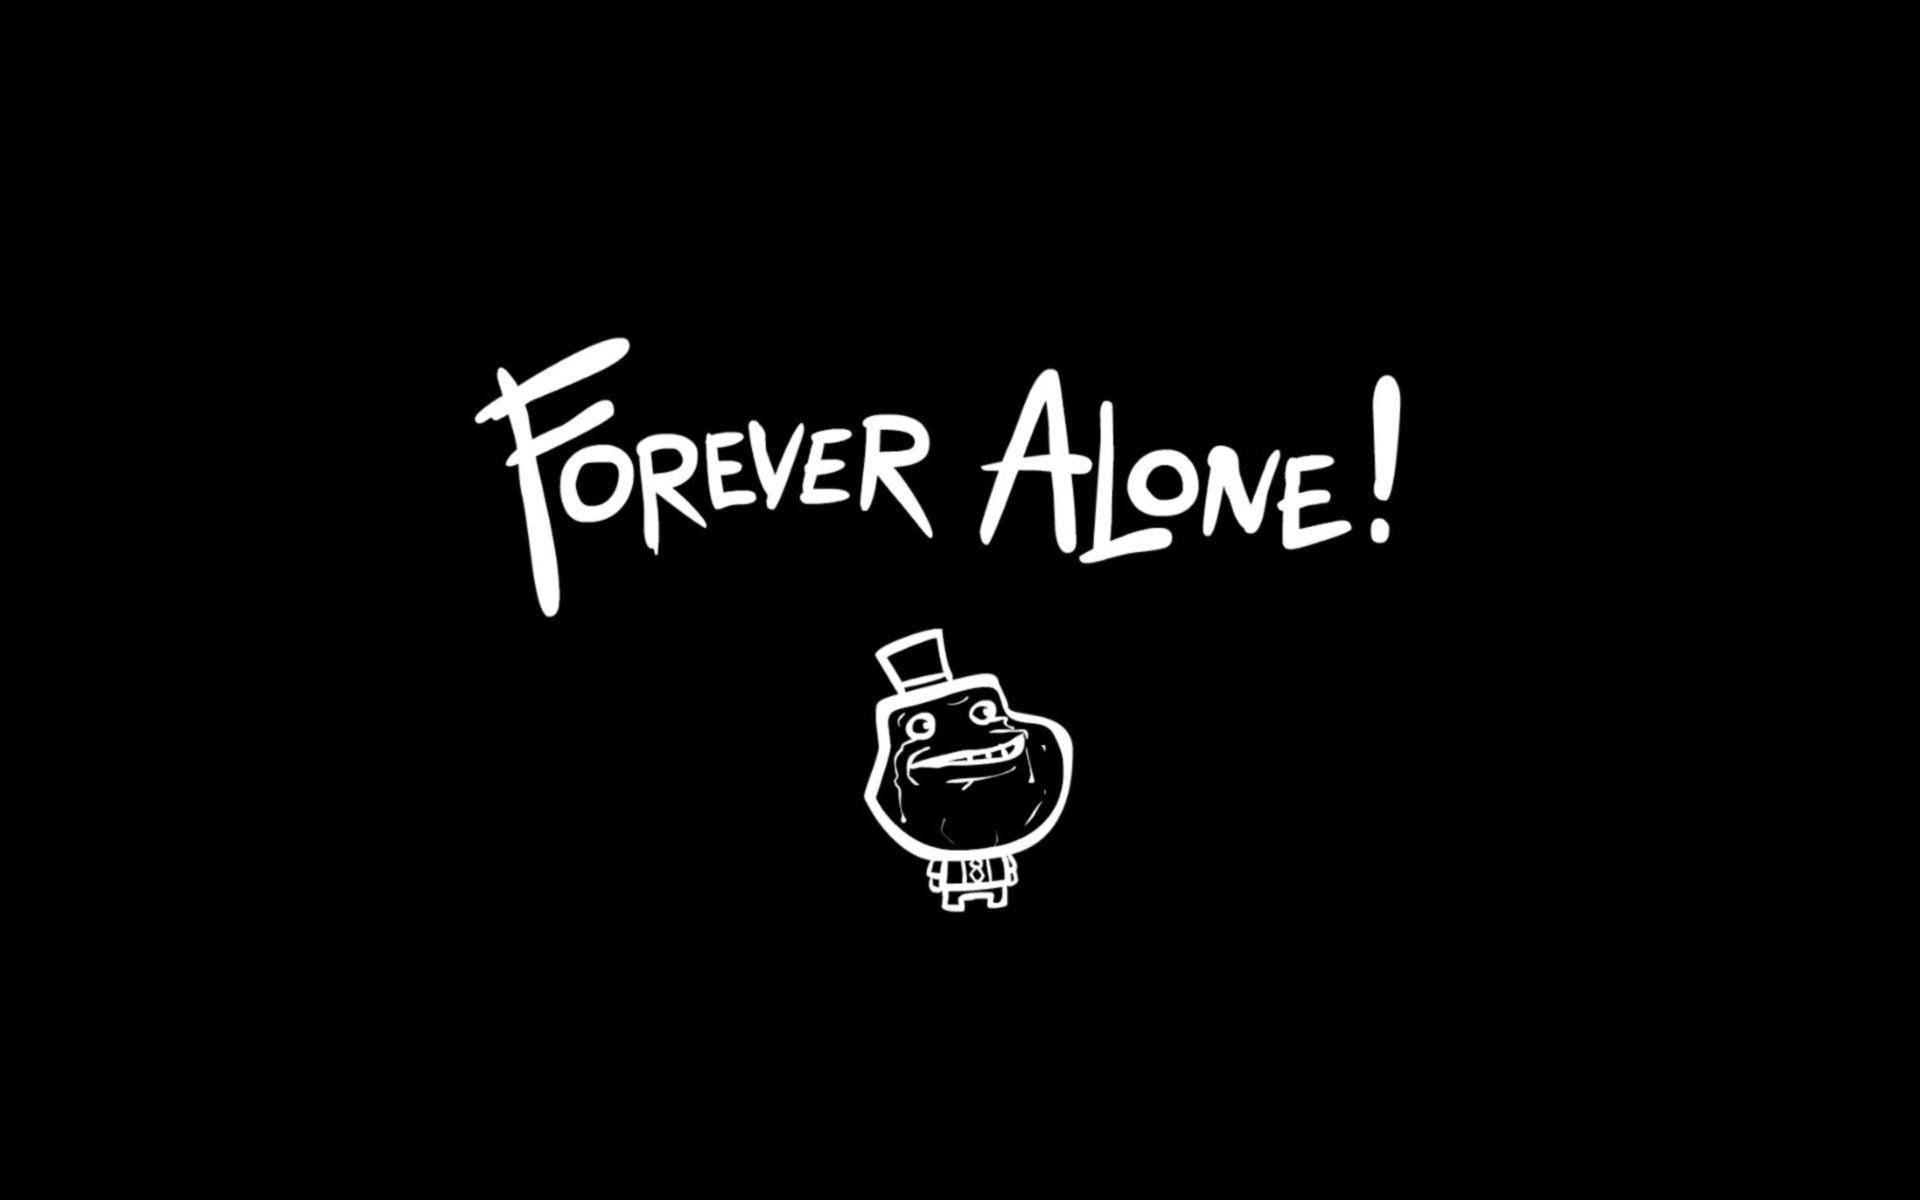 Wallpaper.wiki Alone Forever Funny Sayings Image PIC WPD004465